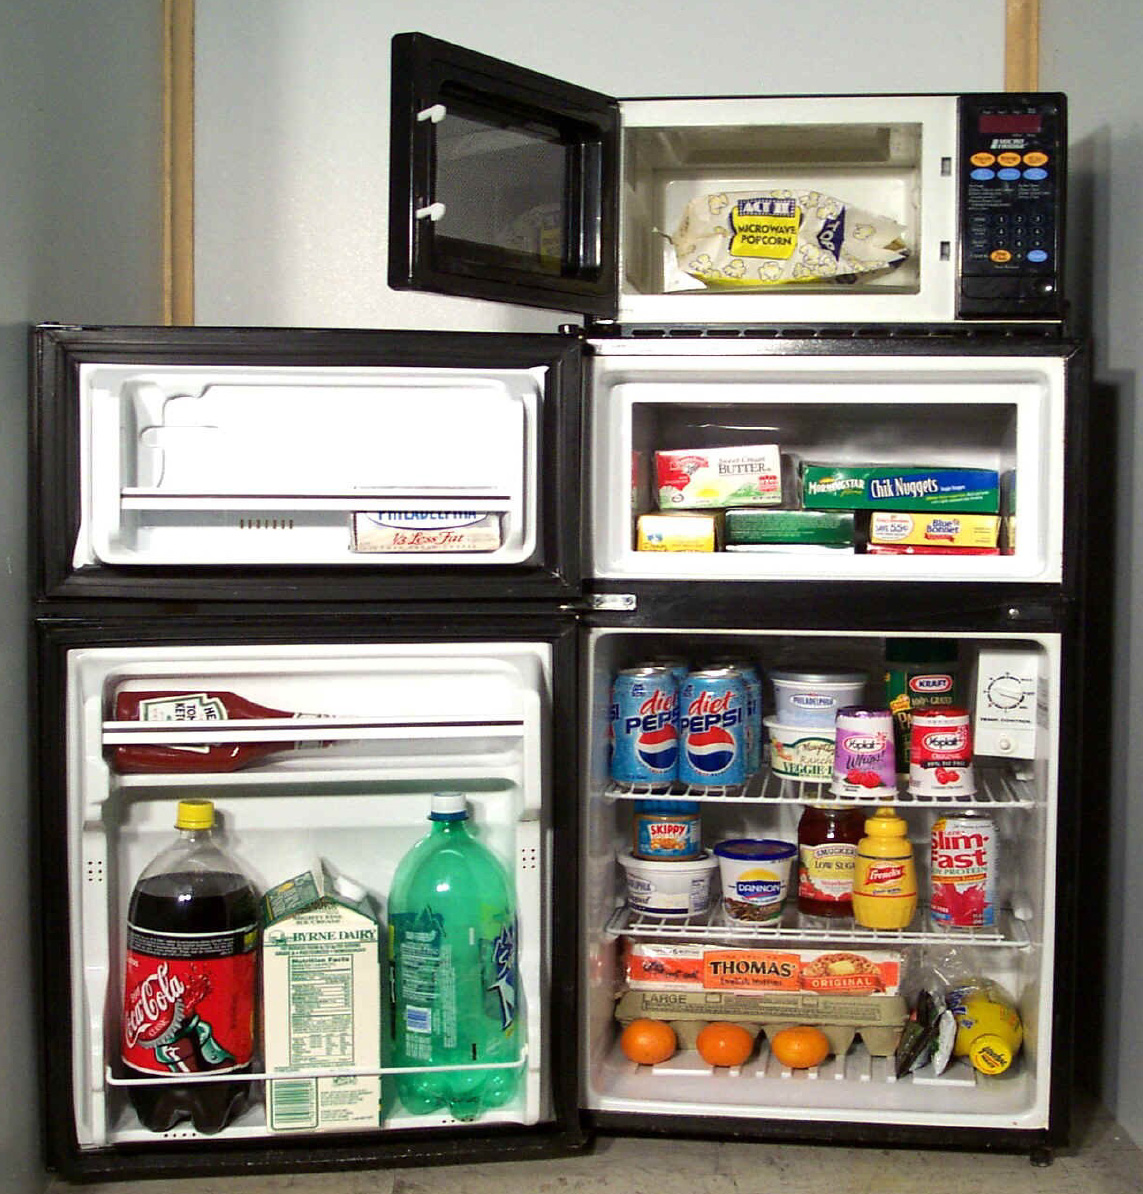 Refrigerator and Microwave Policy - Housing